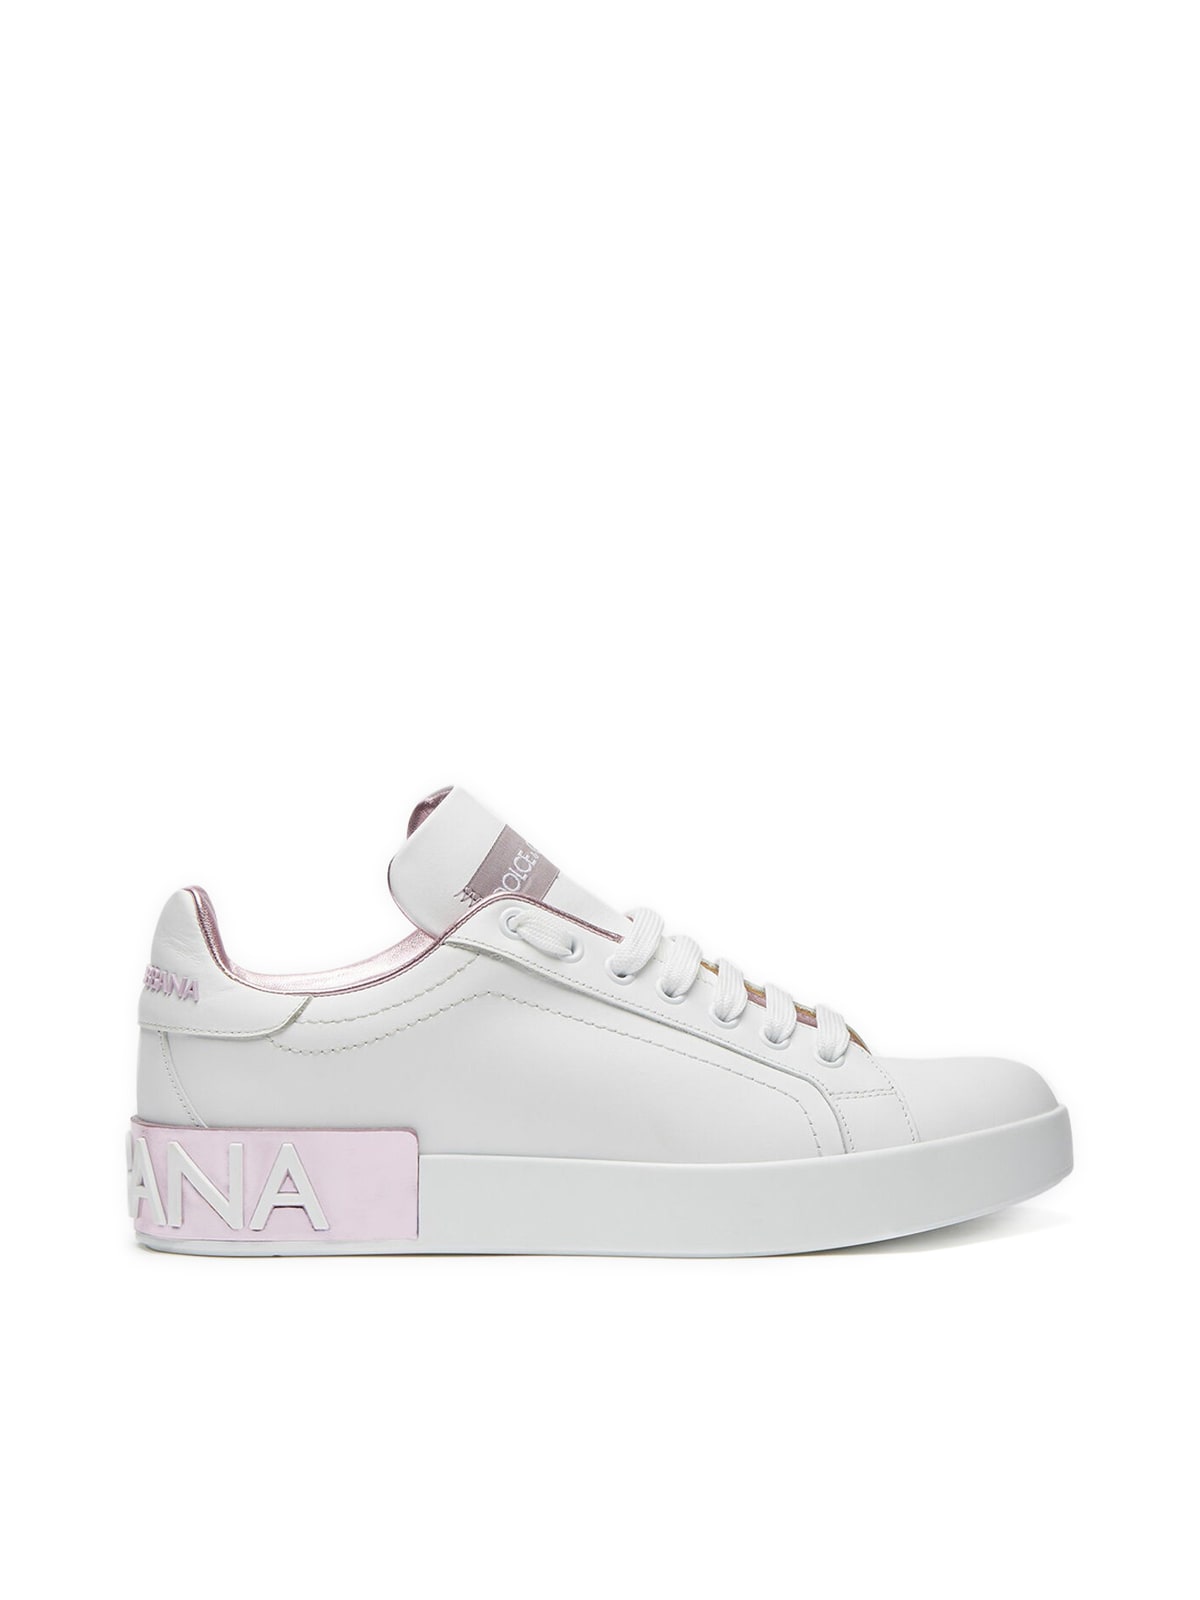 Buy Dolce & Gabbana Portofino Low-top Sneakers online, shop Dolce & Gabbana shoes with free shipping